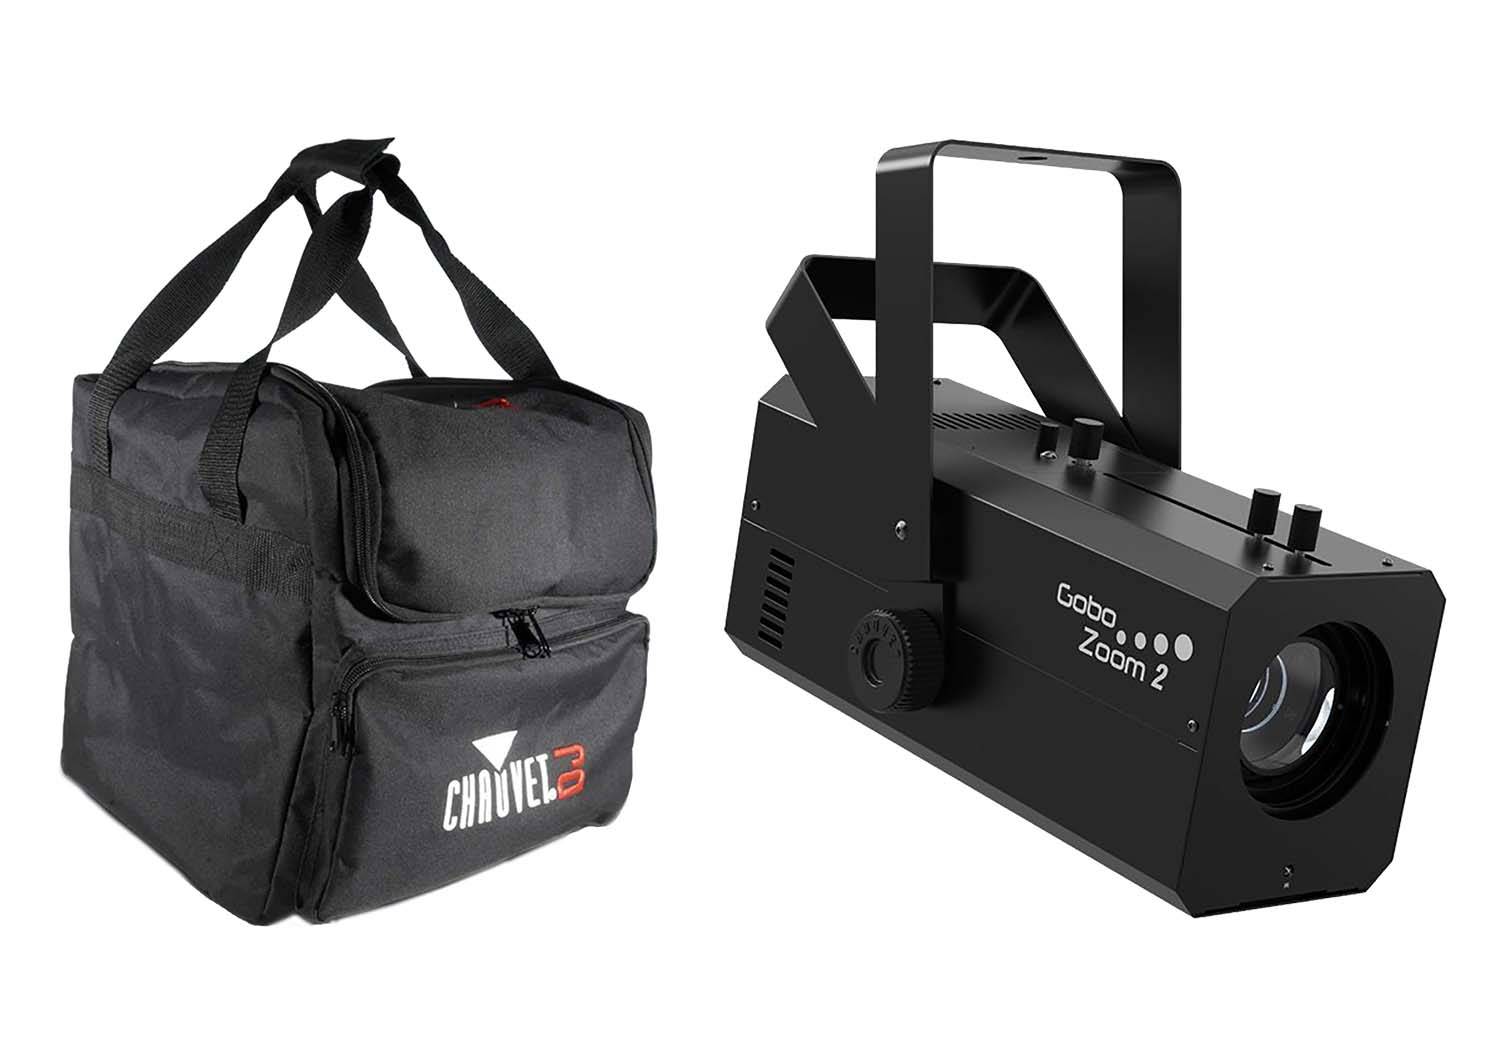 Chauvet DJ Gobo Lighting Package with Gobo Zoom 2 and Carrying Case - Hollywood DJ